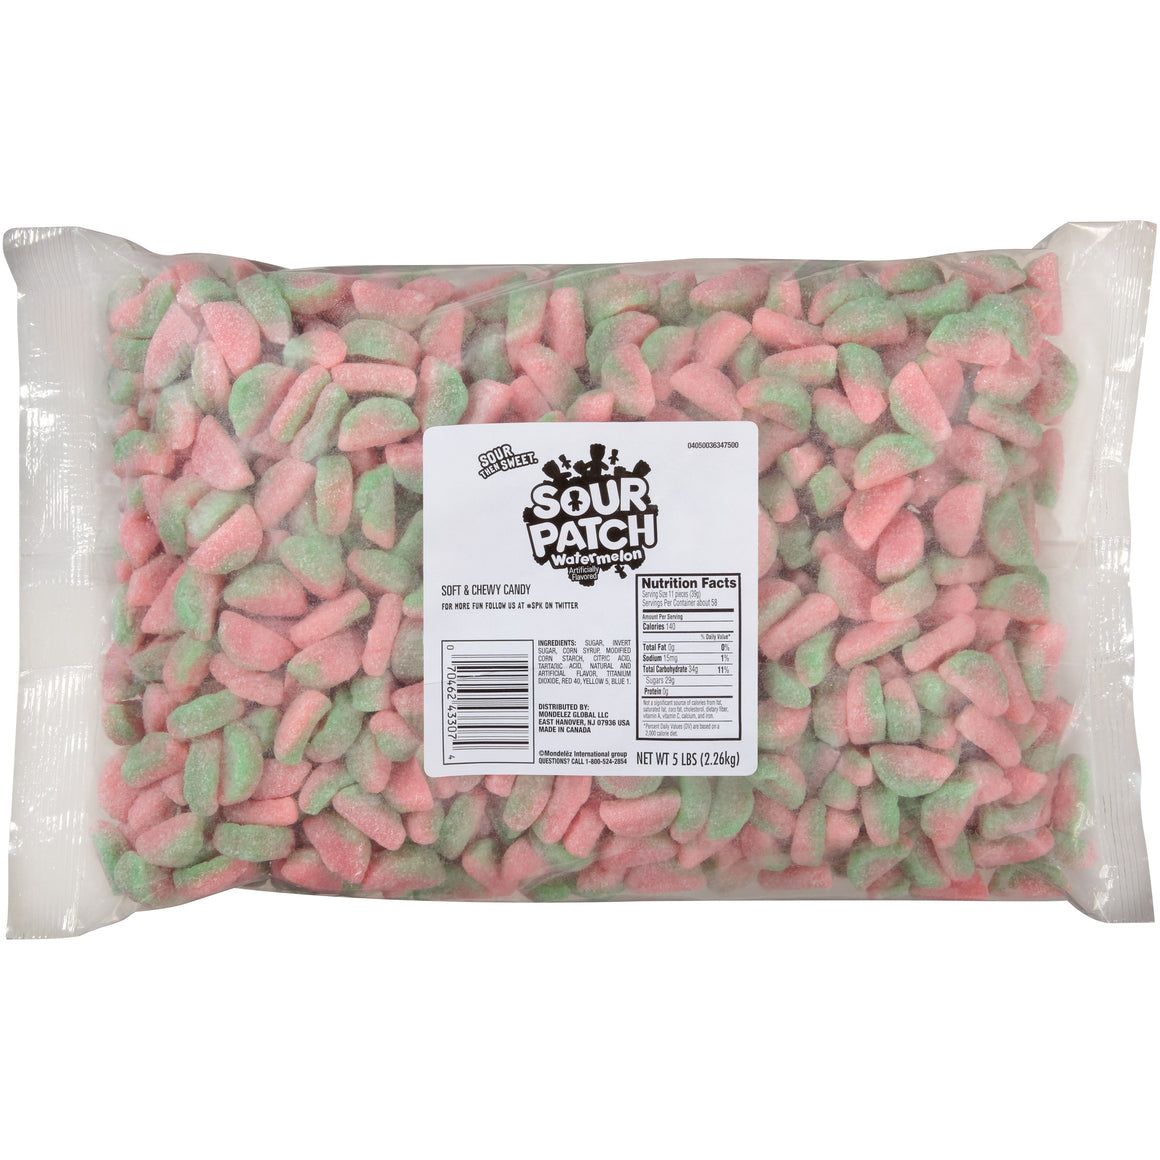 All City Candy Sour Patch Green Rind Watermelon Soft & Chewy Candy Bulk Bags Bulk Unwrapped Mondelez International For fresh candy and great service, visit www.allcitycandy.com